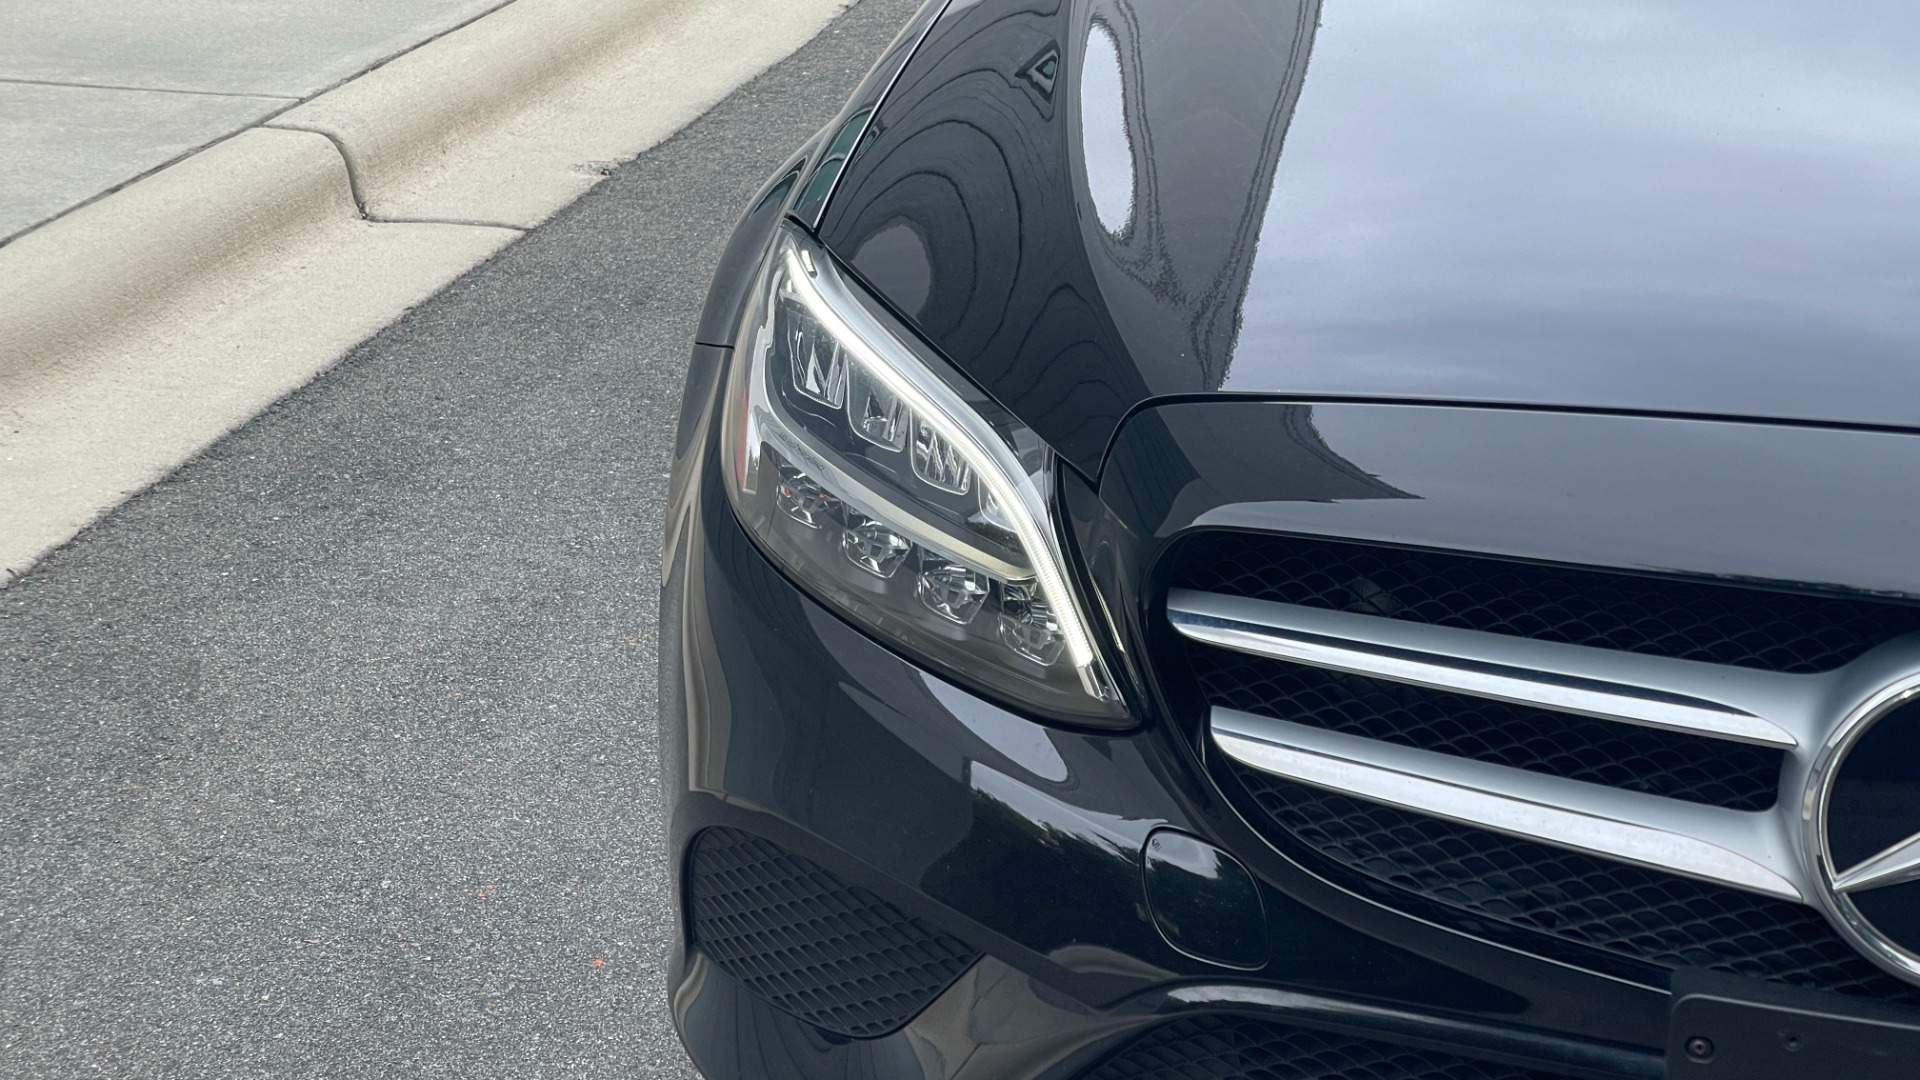 Used 2019 Mercedes-Benz C-Class C 300 / 4MATIC / BURMESTER SOUND / PANORAMIC ROOF / PREMIUM / MULTIMEDIA for sale Sold at Formula Imports in Charlotte NC 28227 23